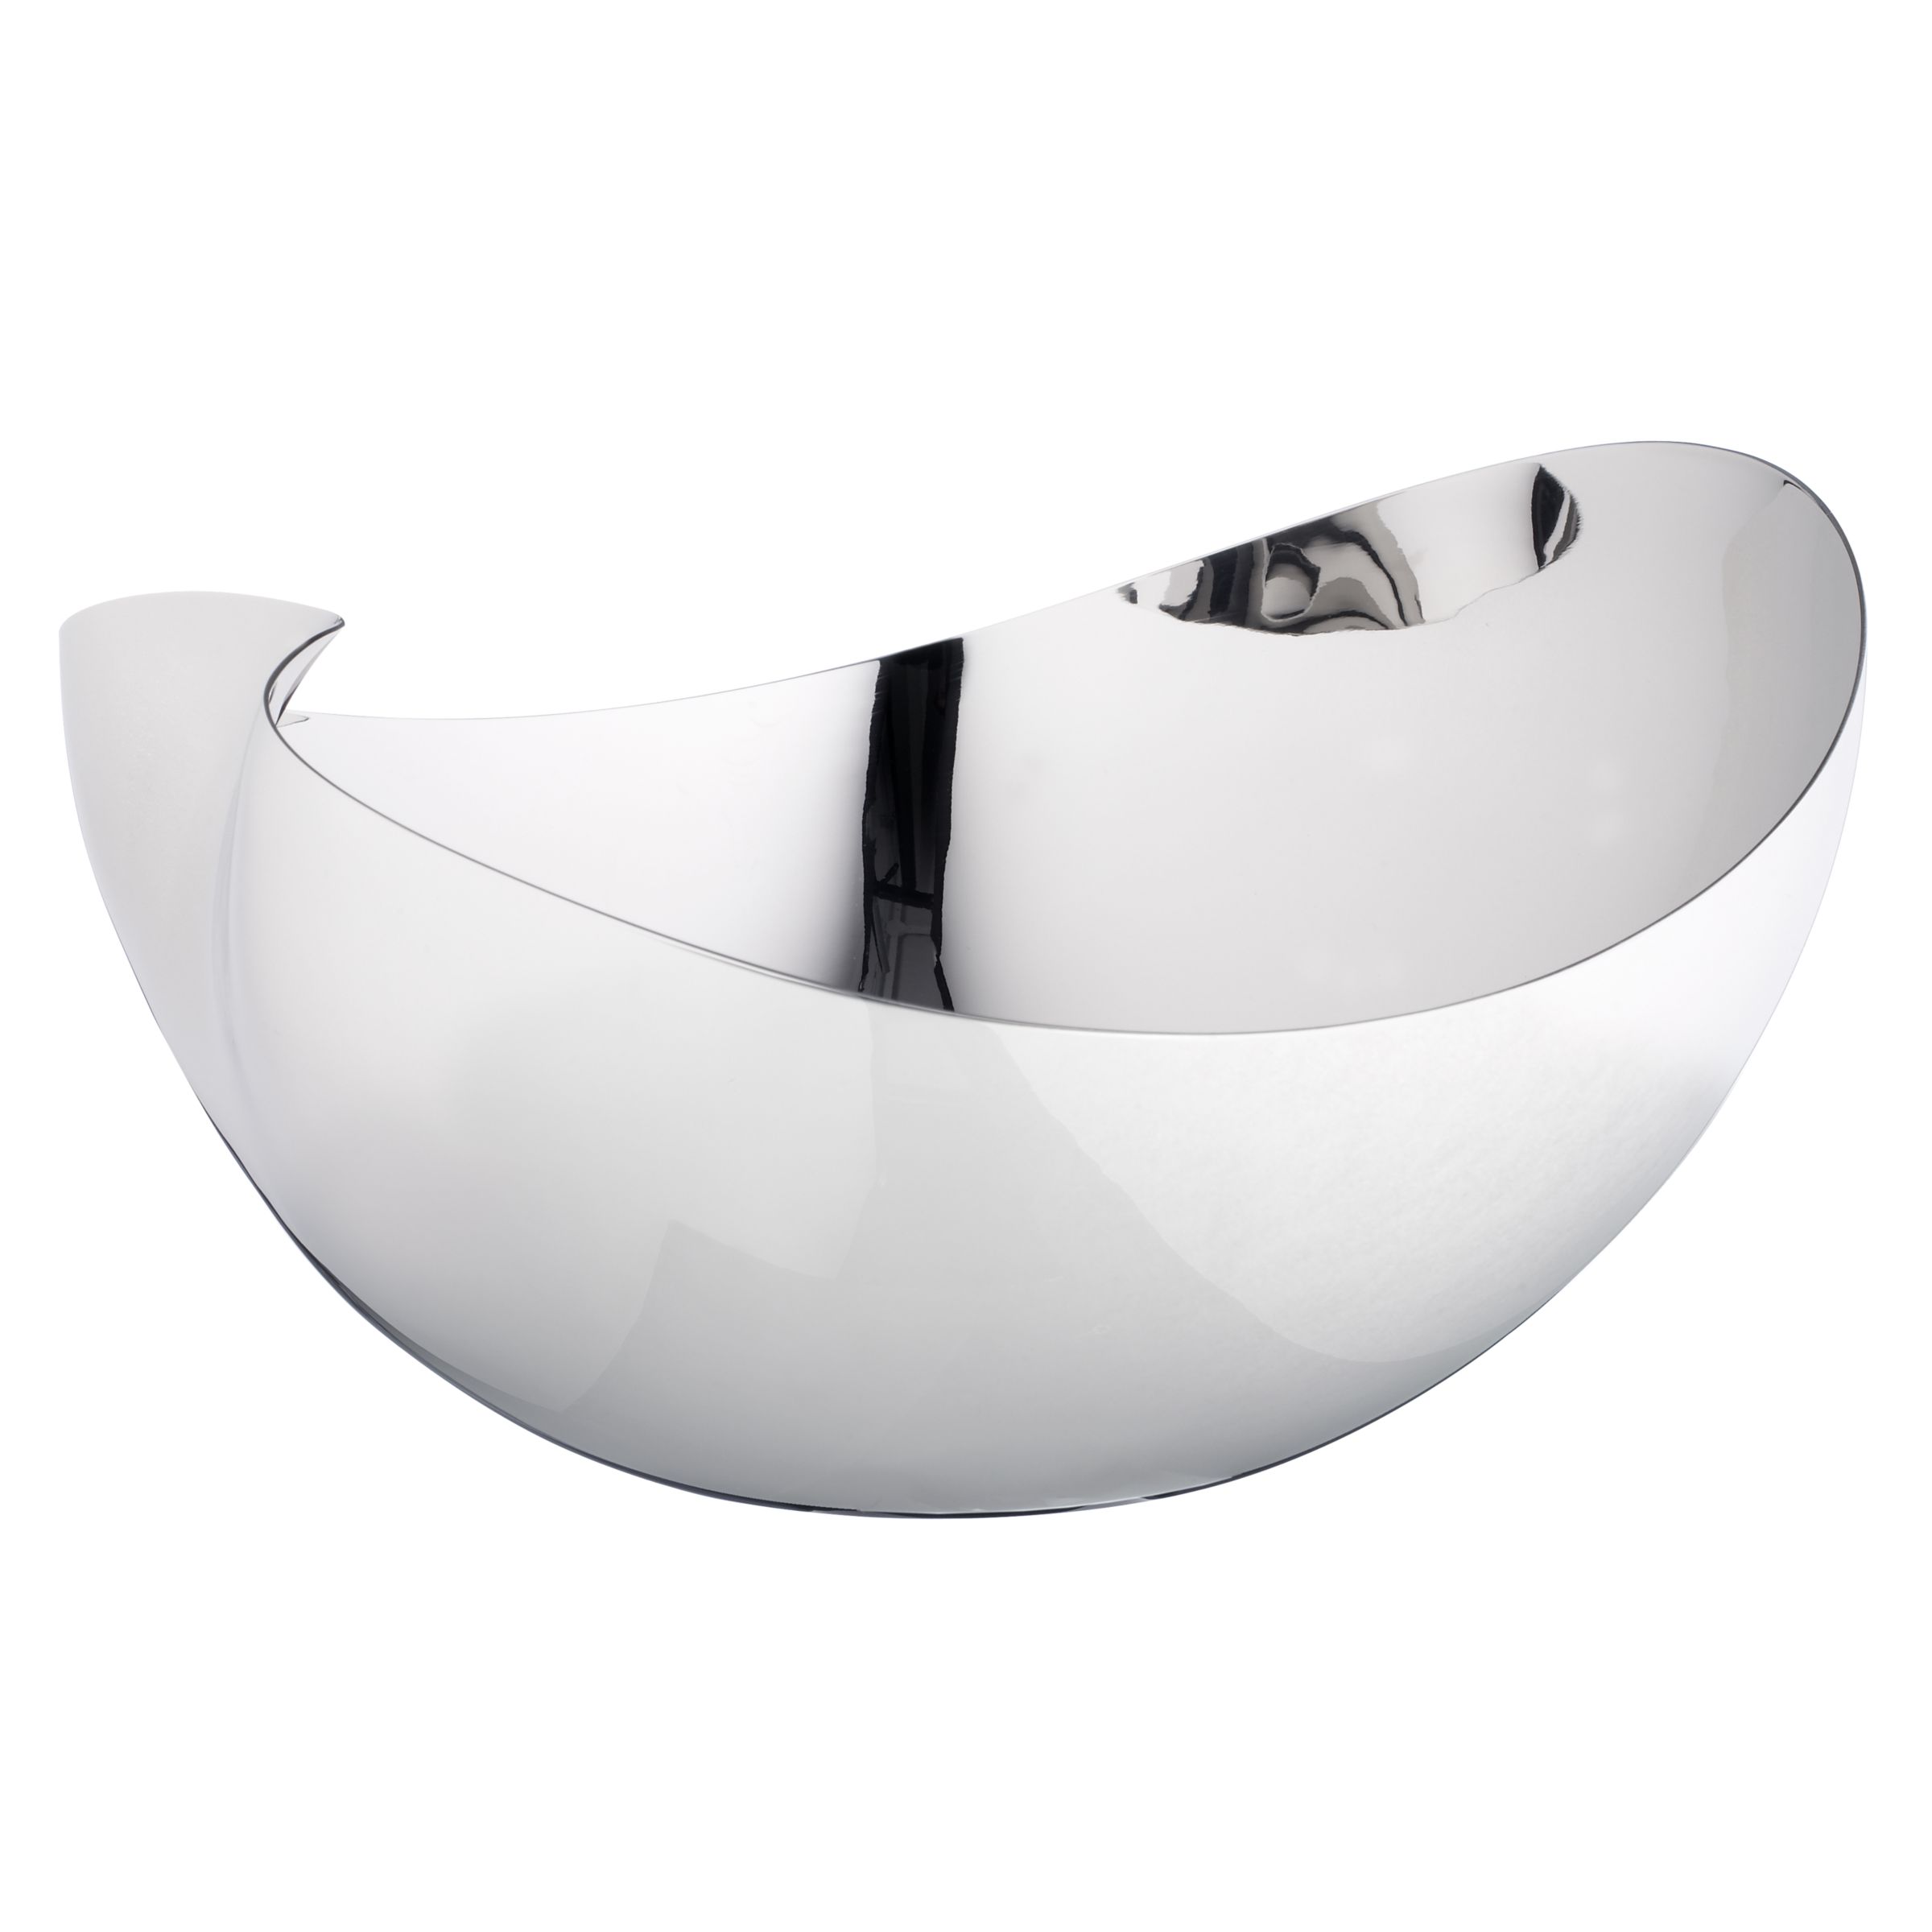 Robert Welch Rushan Stainless Steel Bowls 180065